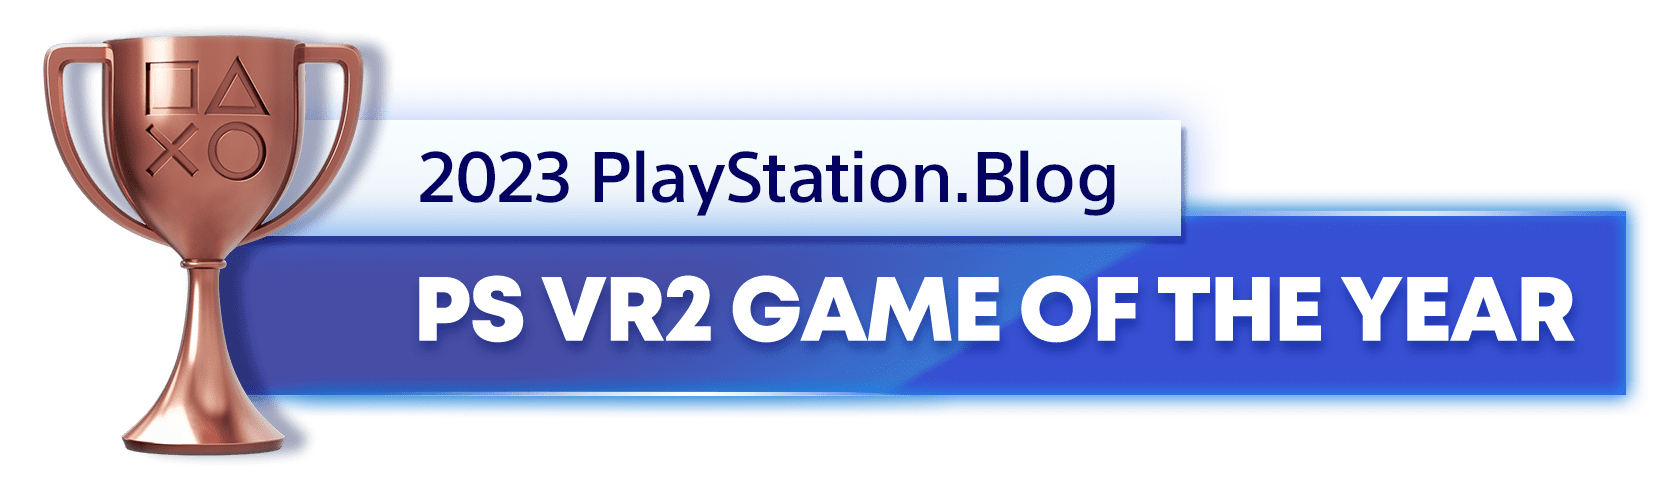 Bronze Trophy for the 2023 PlayStation Blog PS VR2 Game of the Year Winner